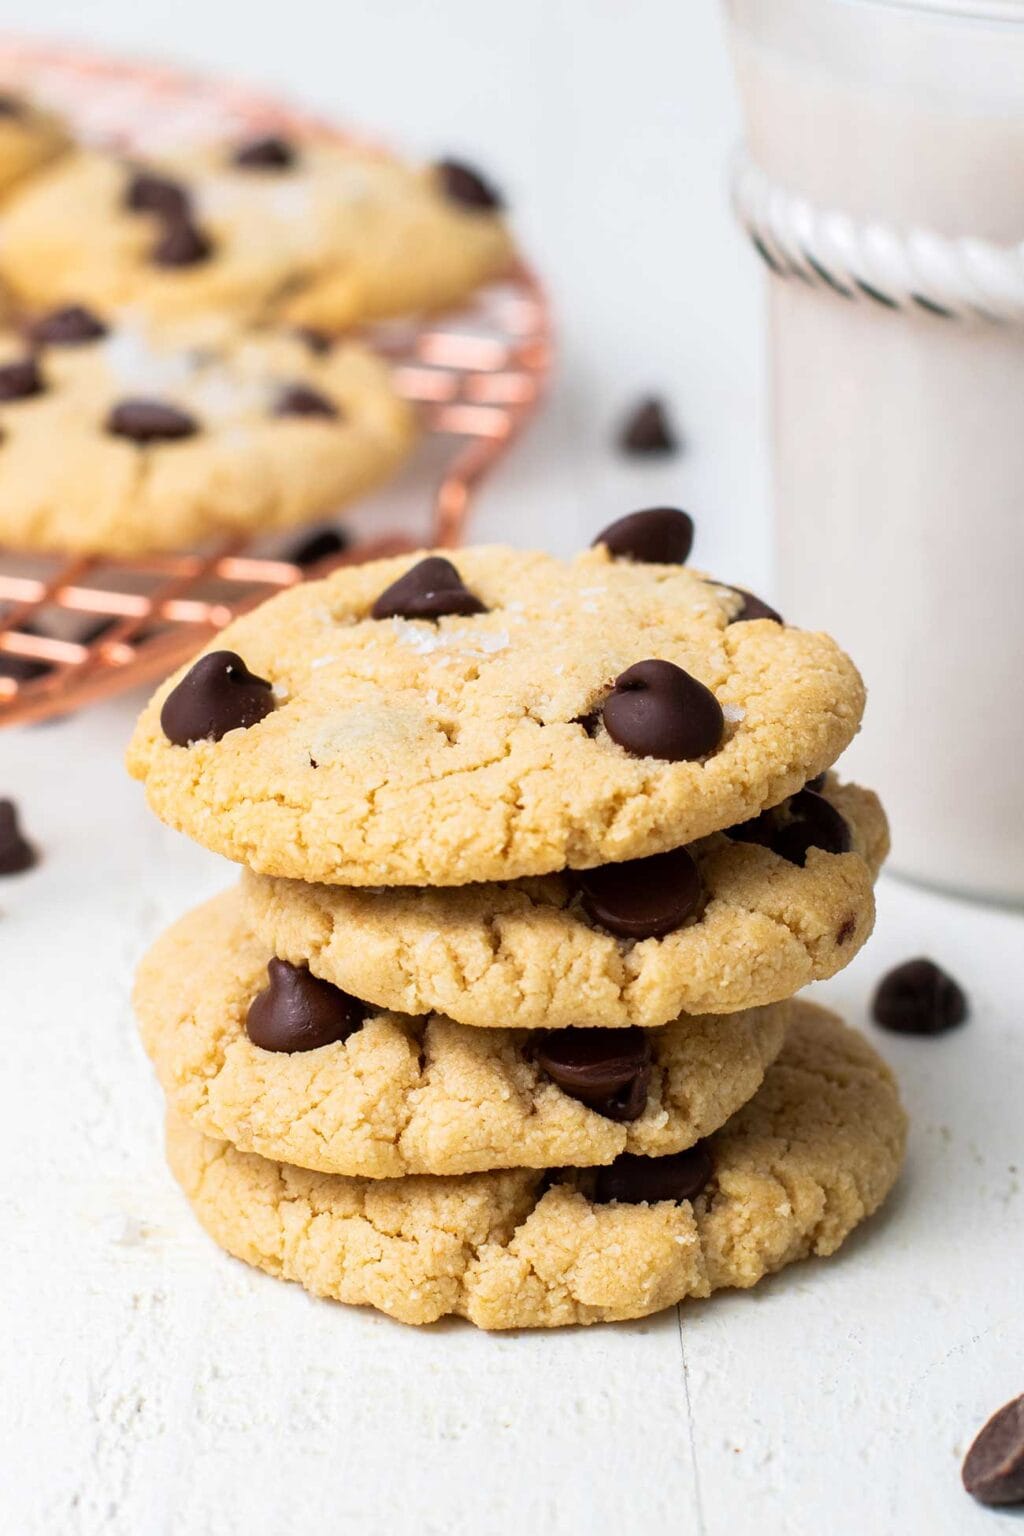 Paleo Chocolate Chip Cookies (The BEST!) - Sunkissed Kitchen